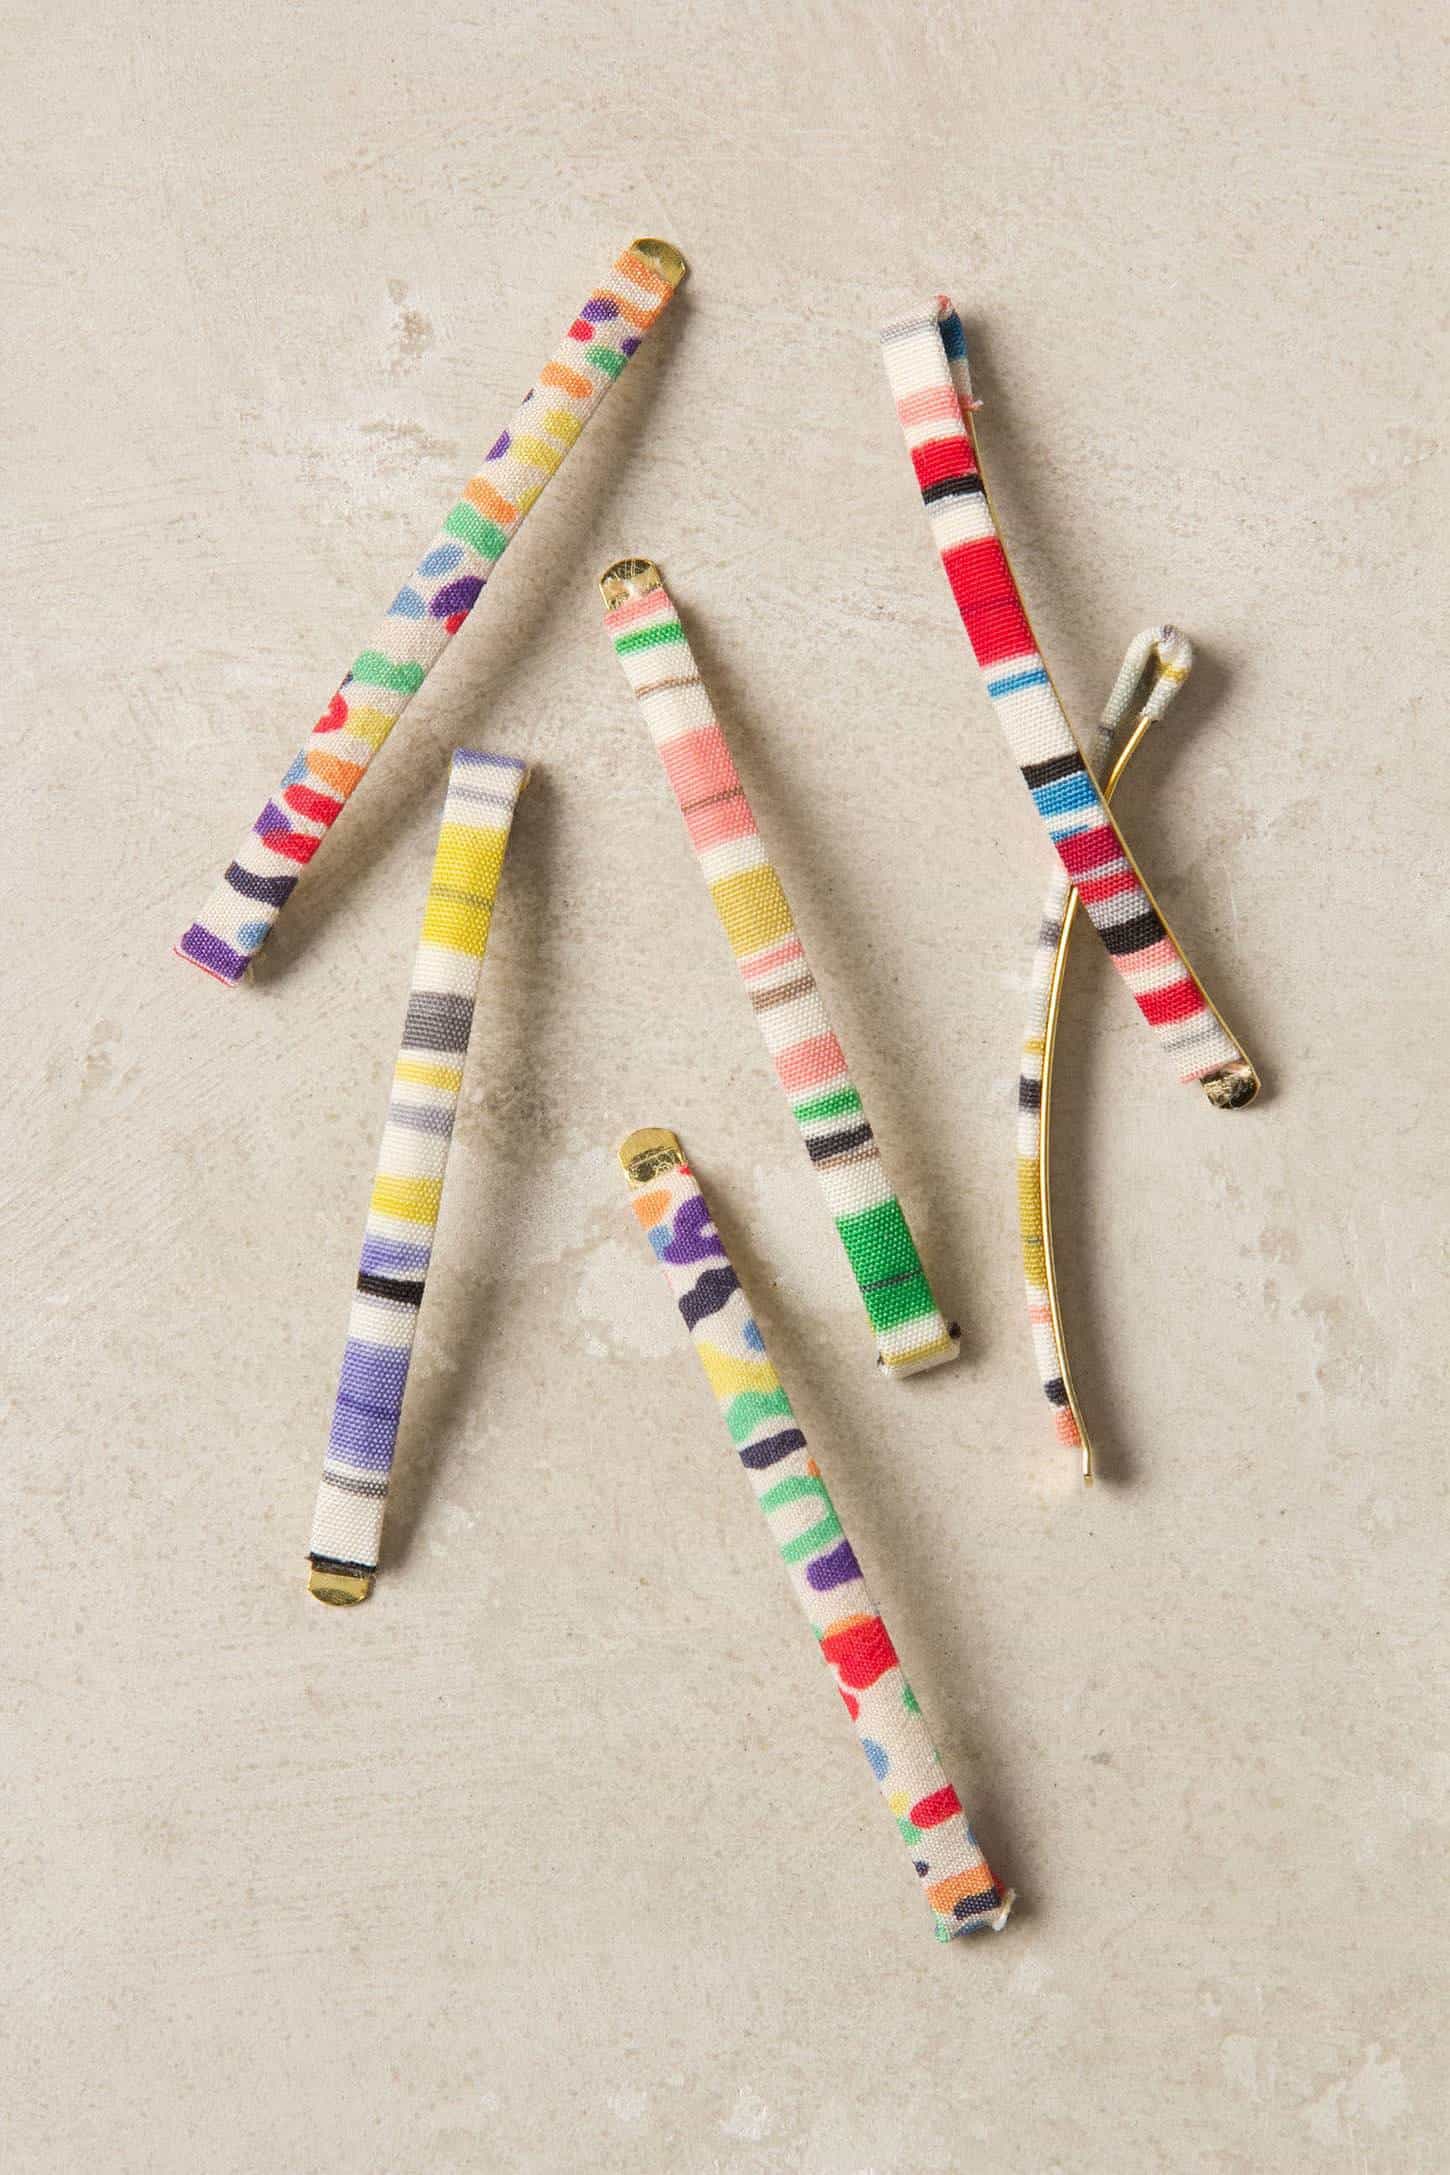 Anthropology-inspired material hairpins